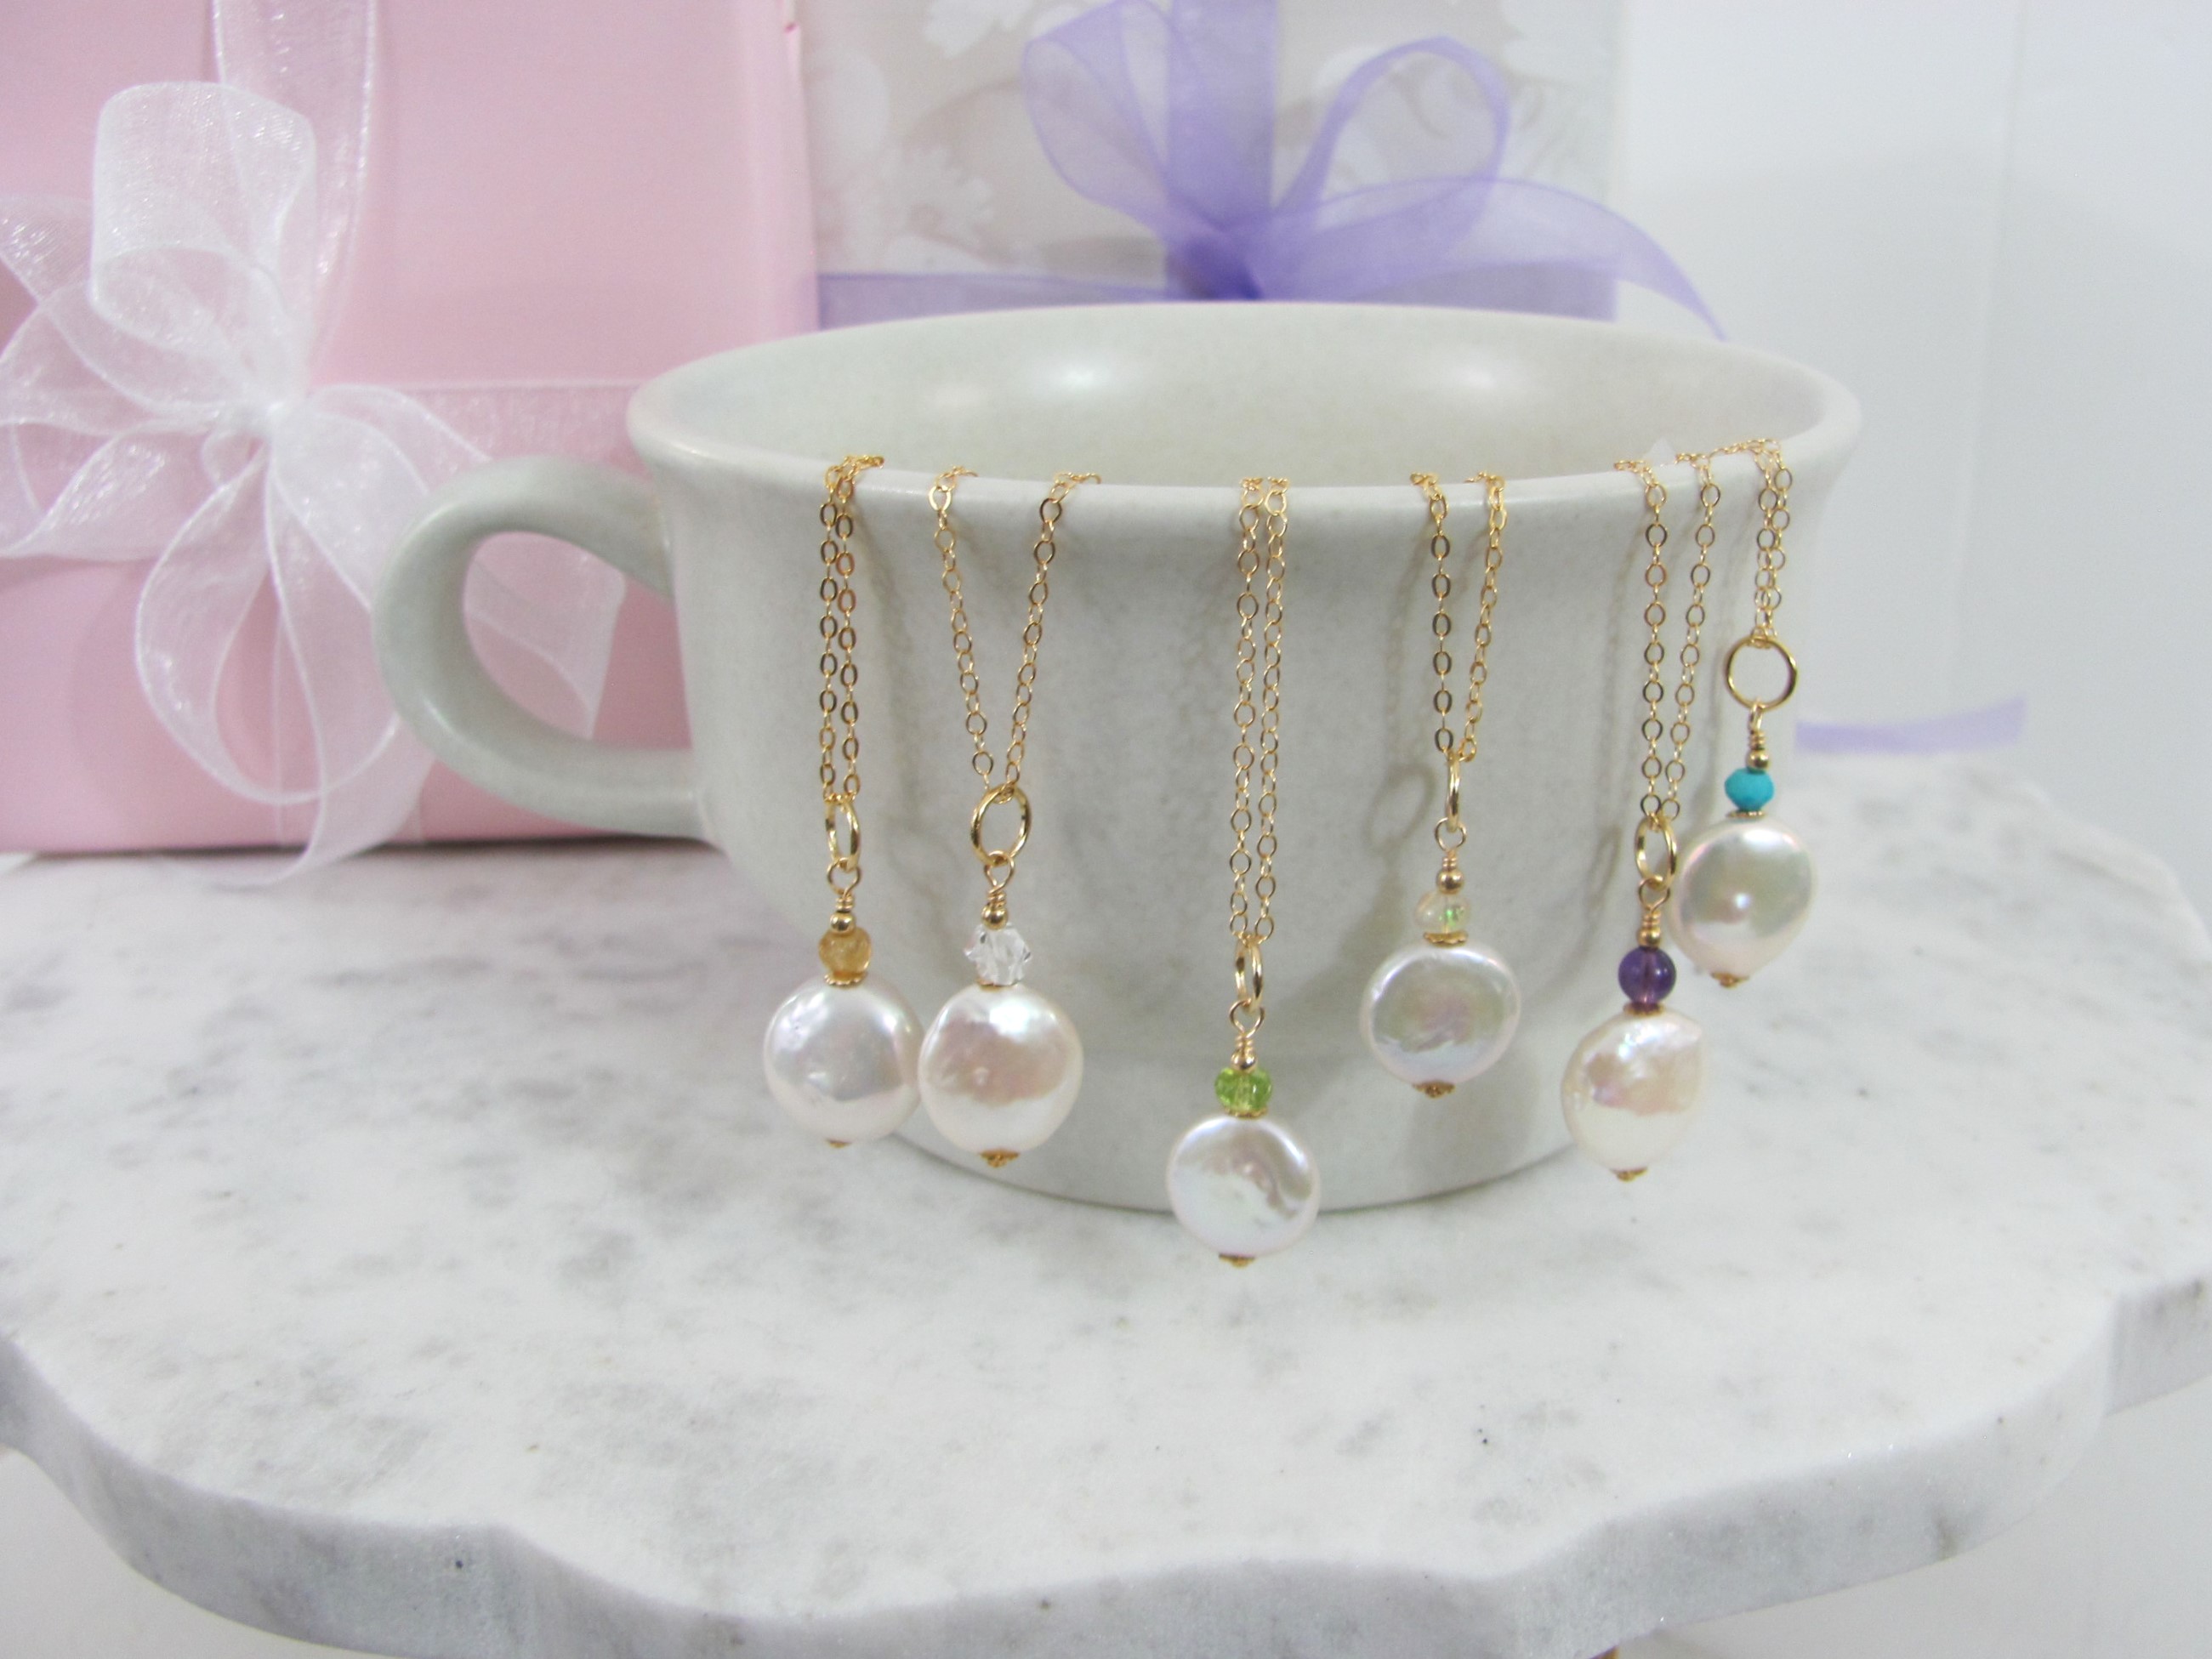 Bridesmaid Proposal Gift, Personalized Coin Pearl Necklace